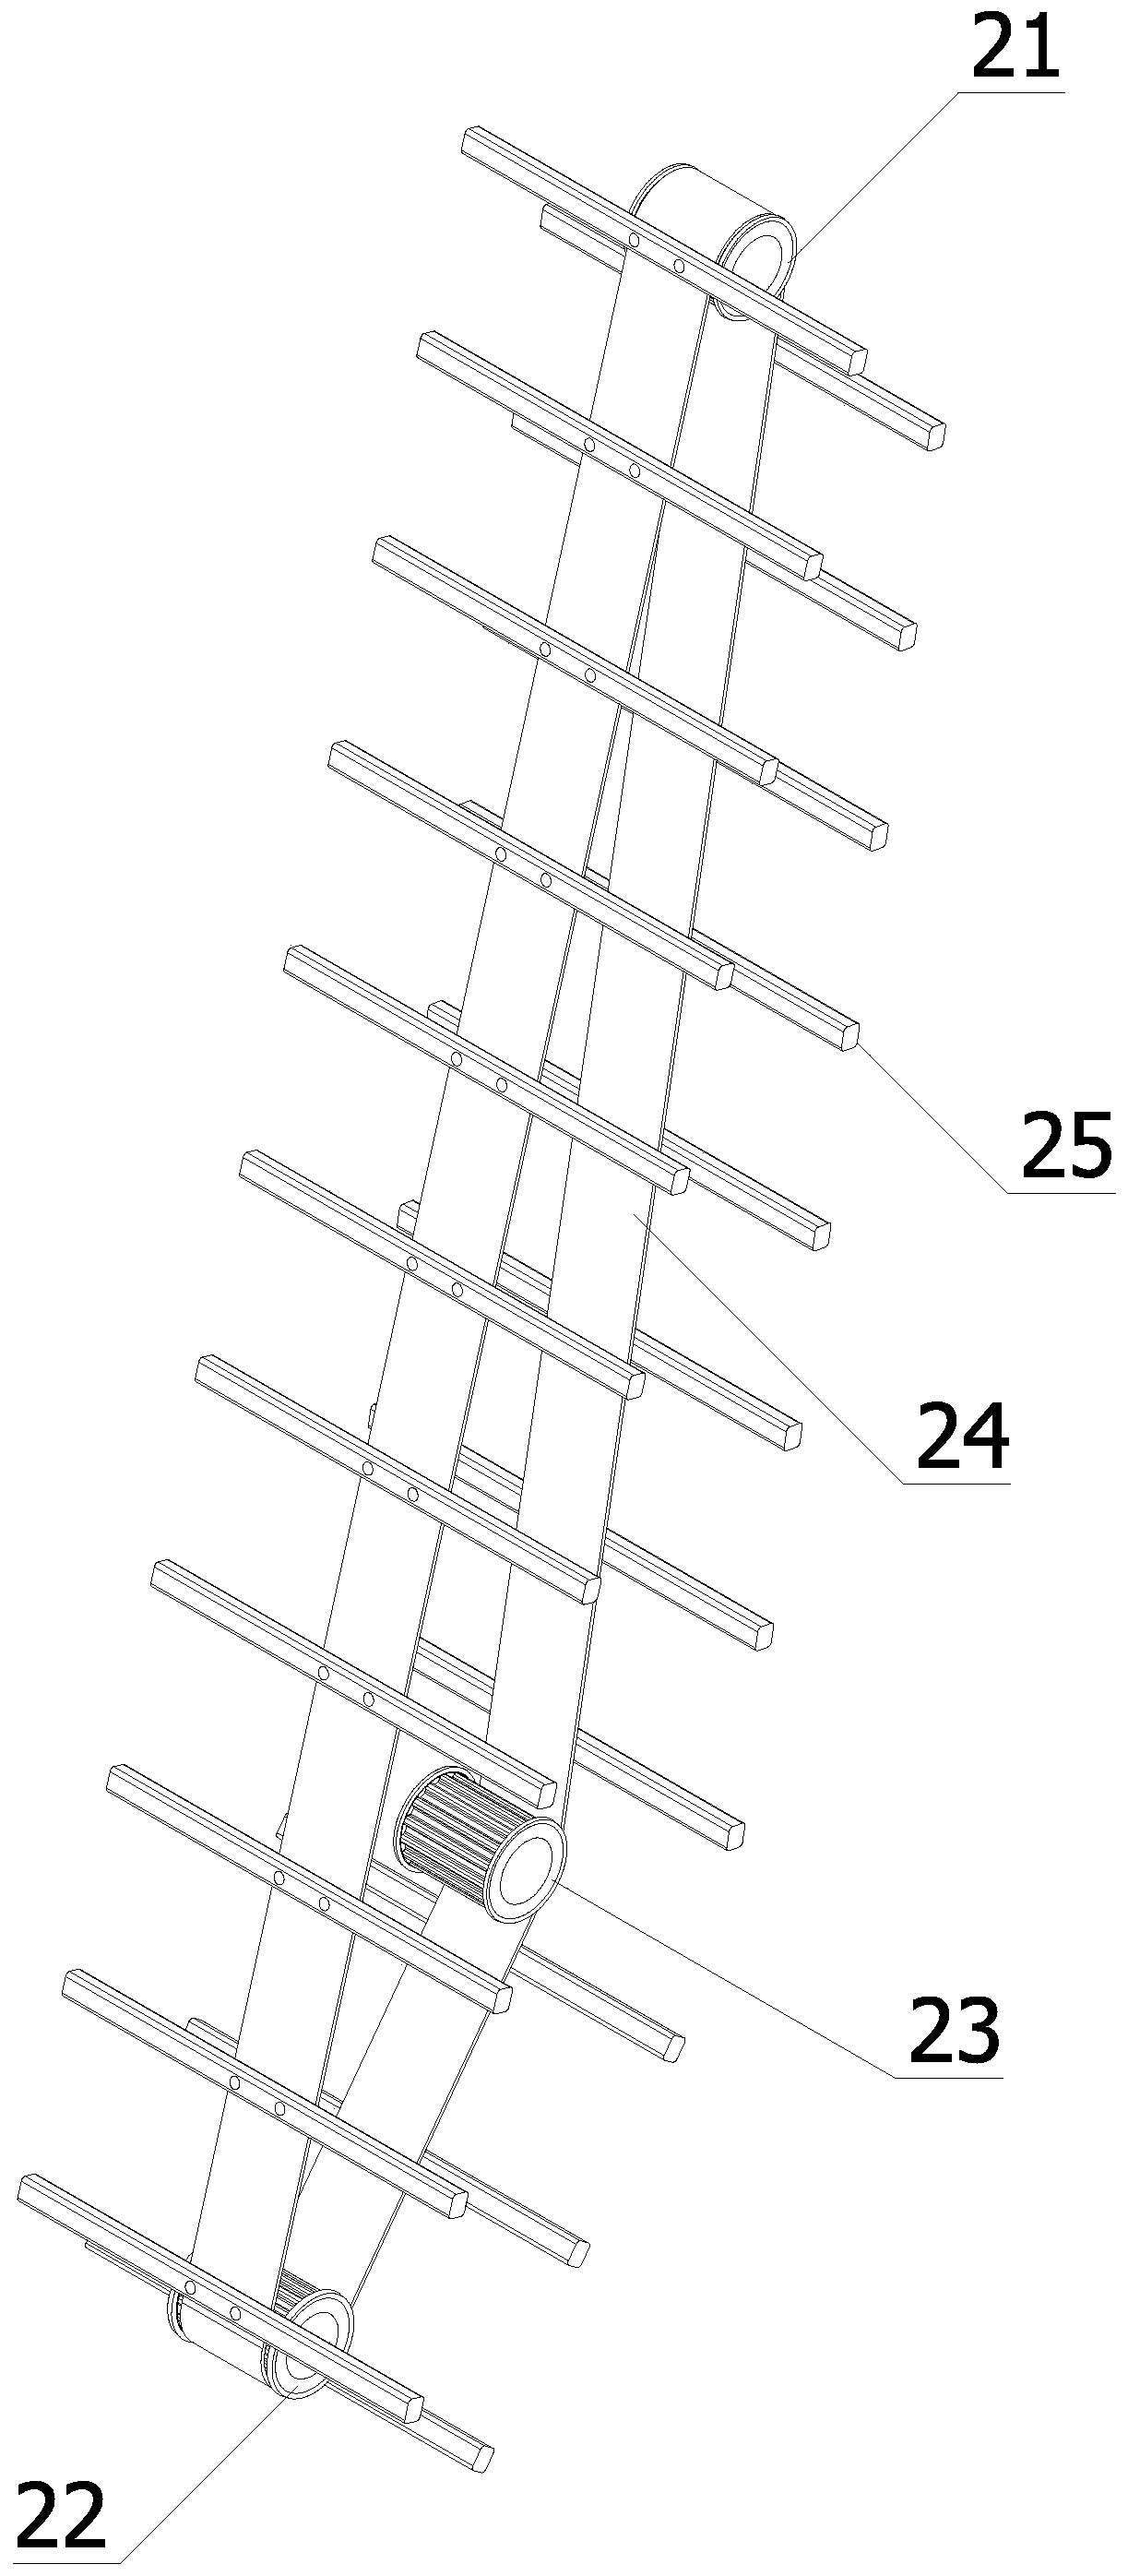 A climbing delivery ladder for power grid